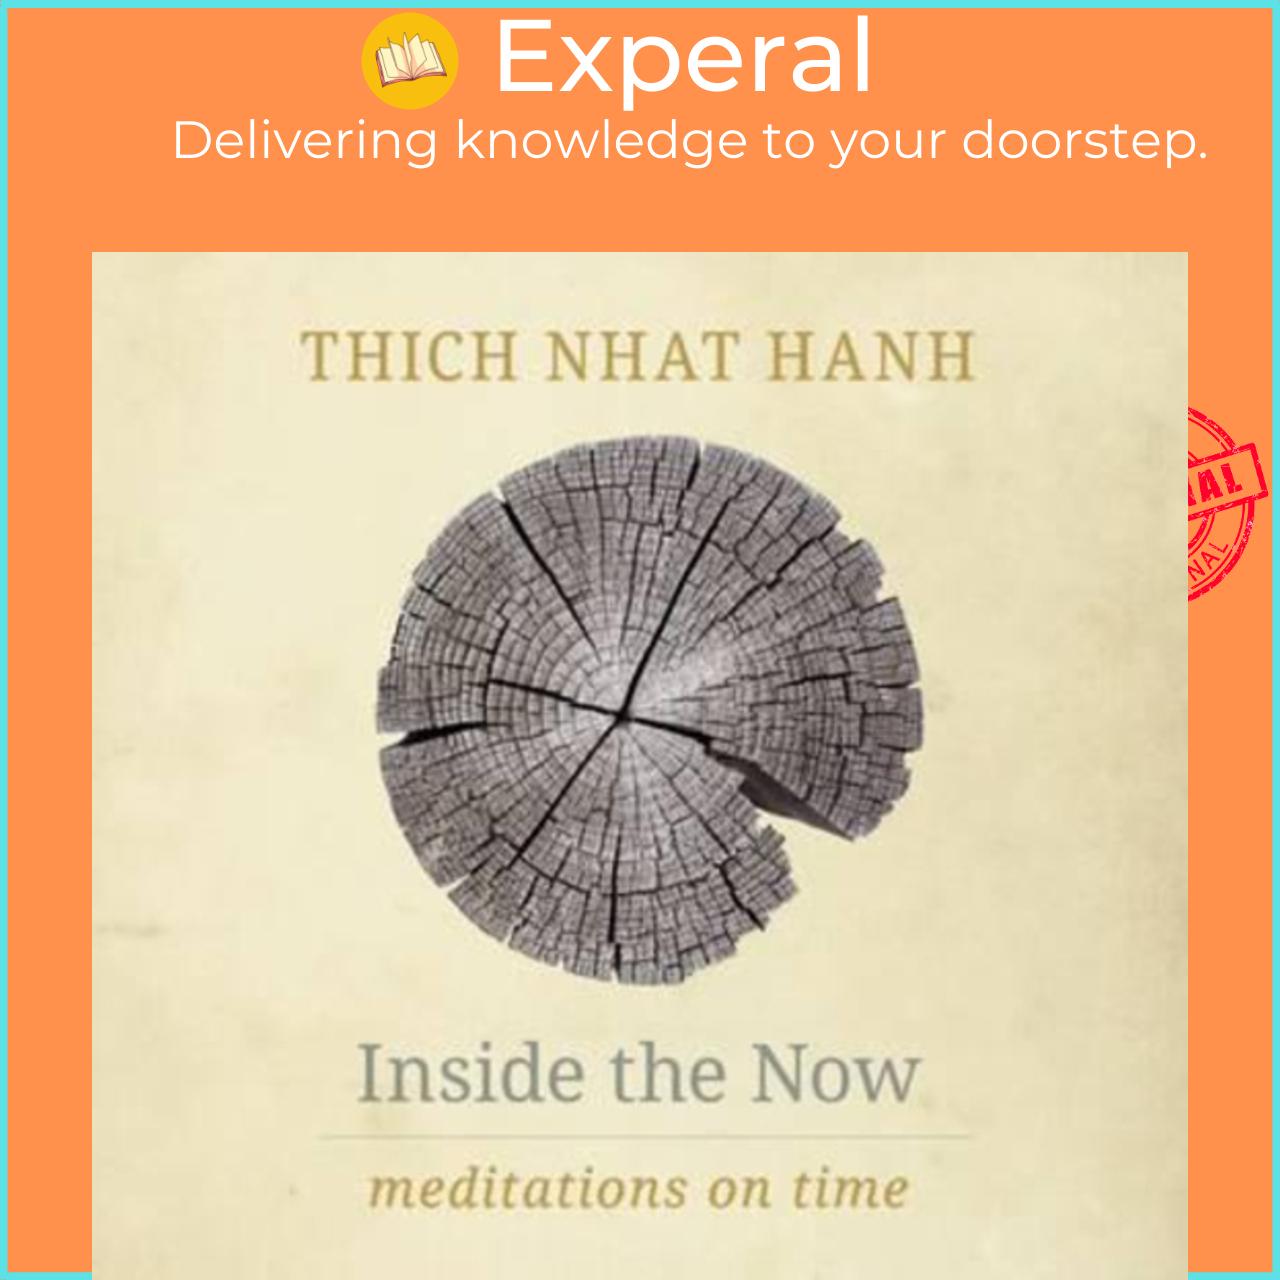 Sách - Inside The Now by Thich Nhat Hanh (US edition, paperback)